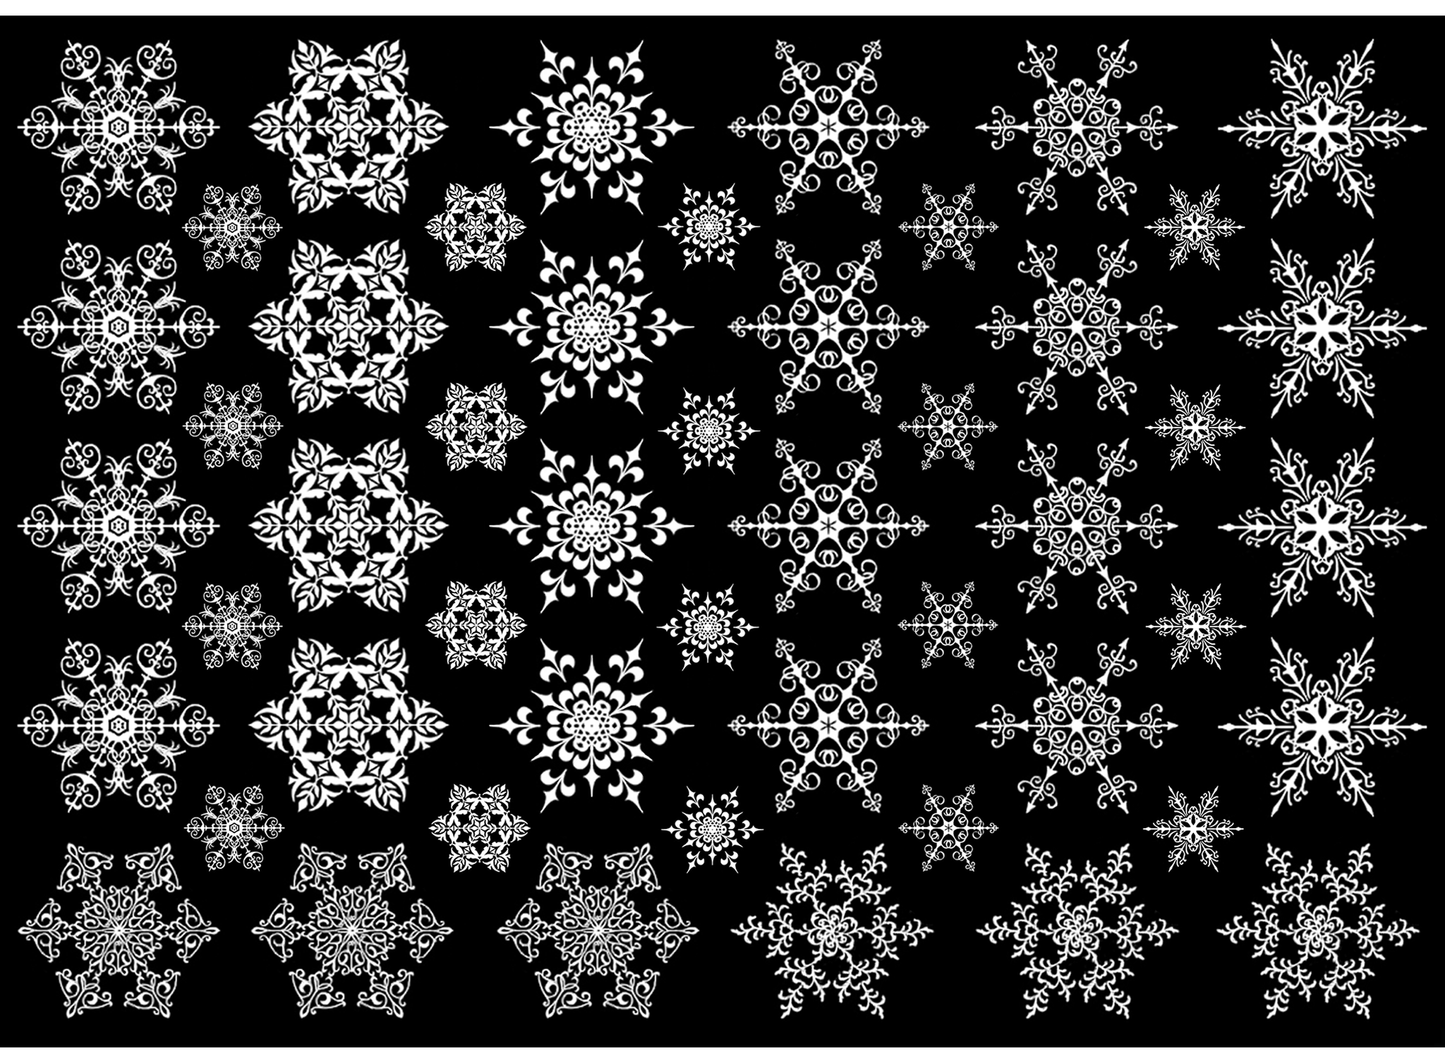 Snowflakes 30 pcs 1" White  Fused Glass Decals